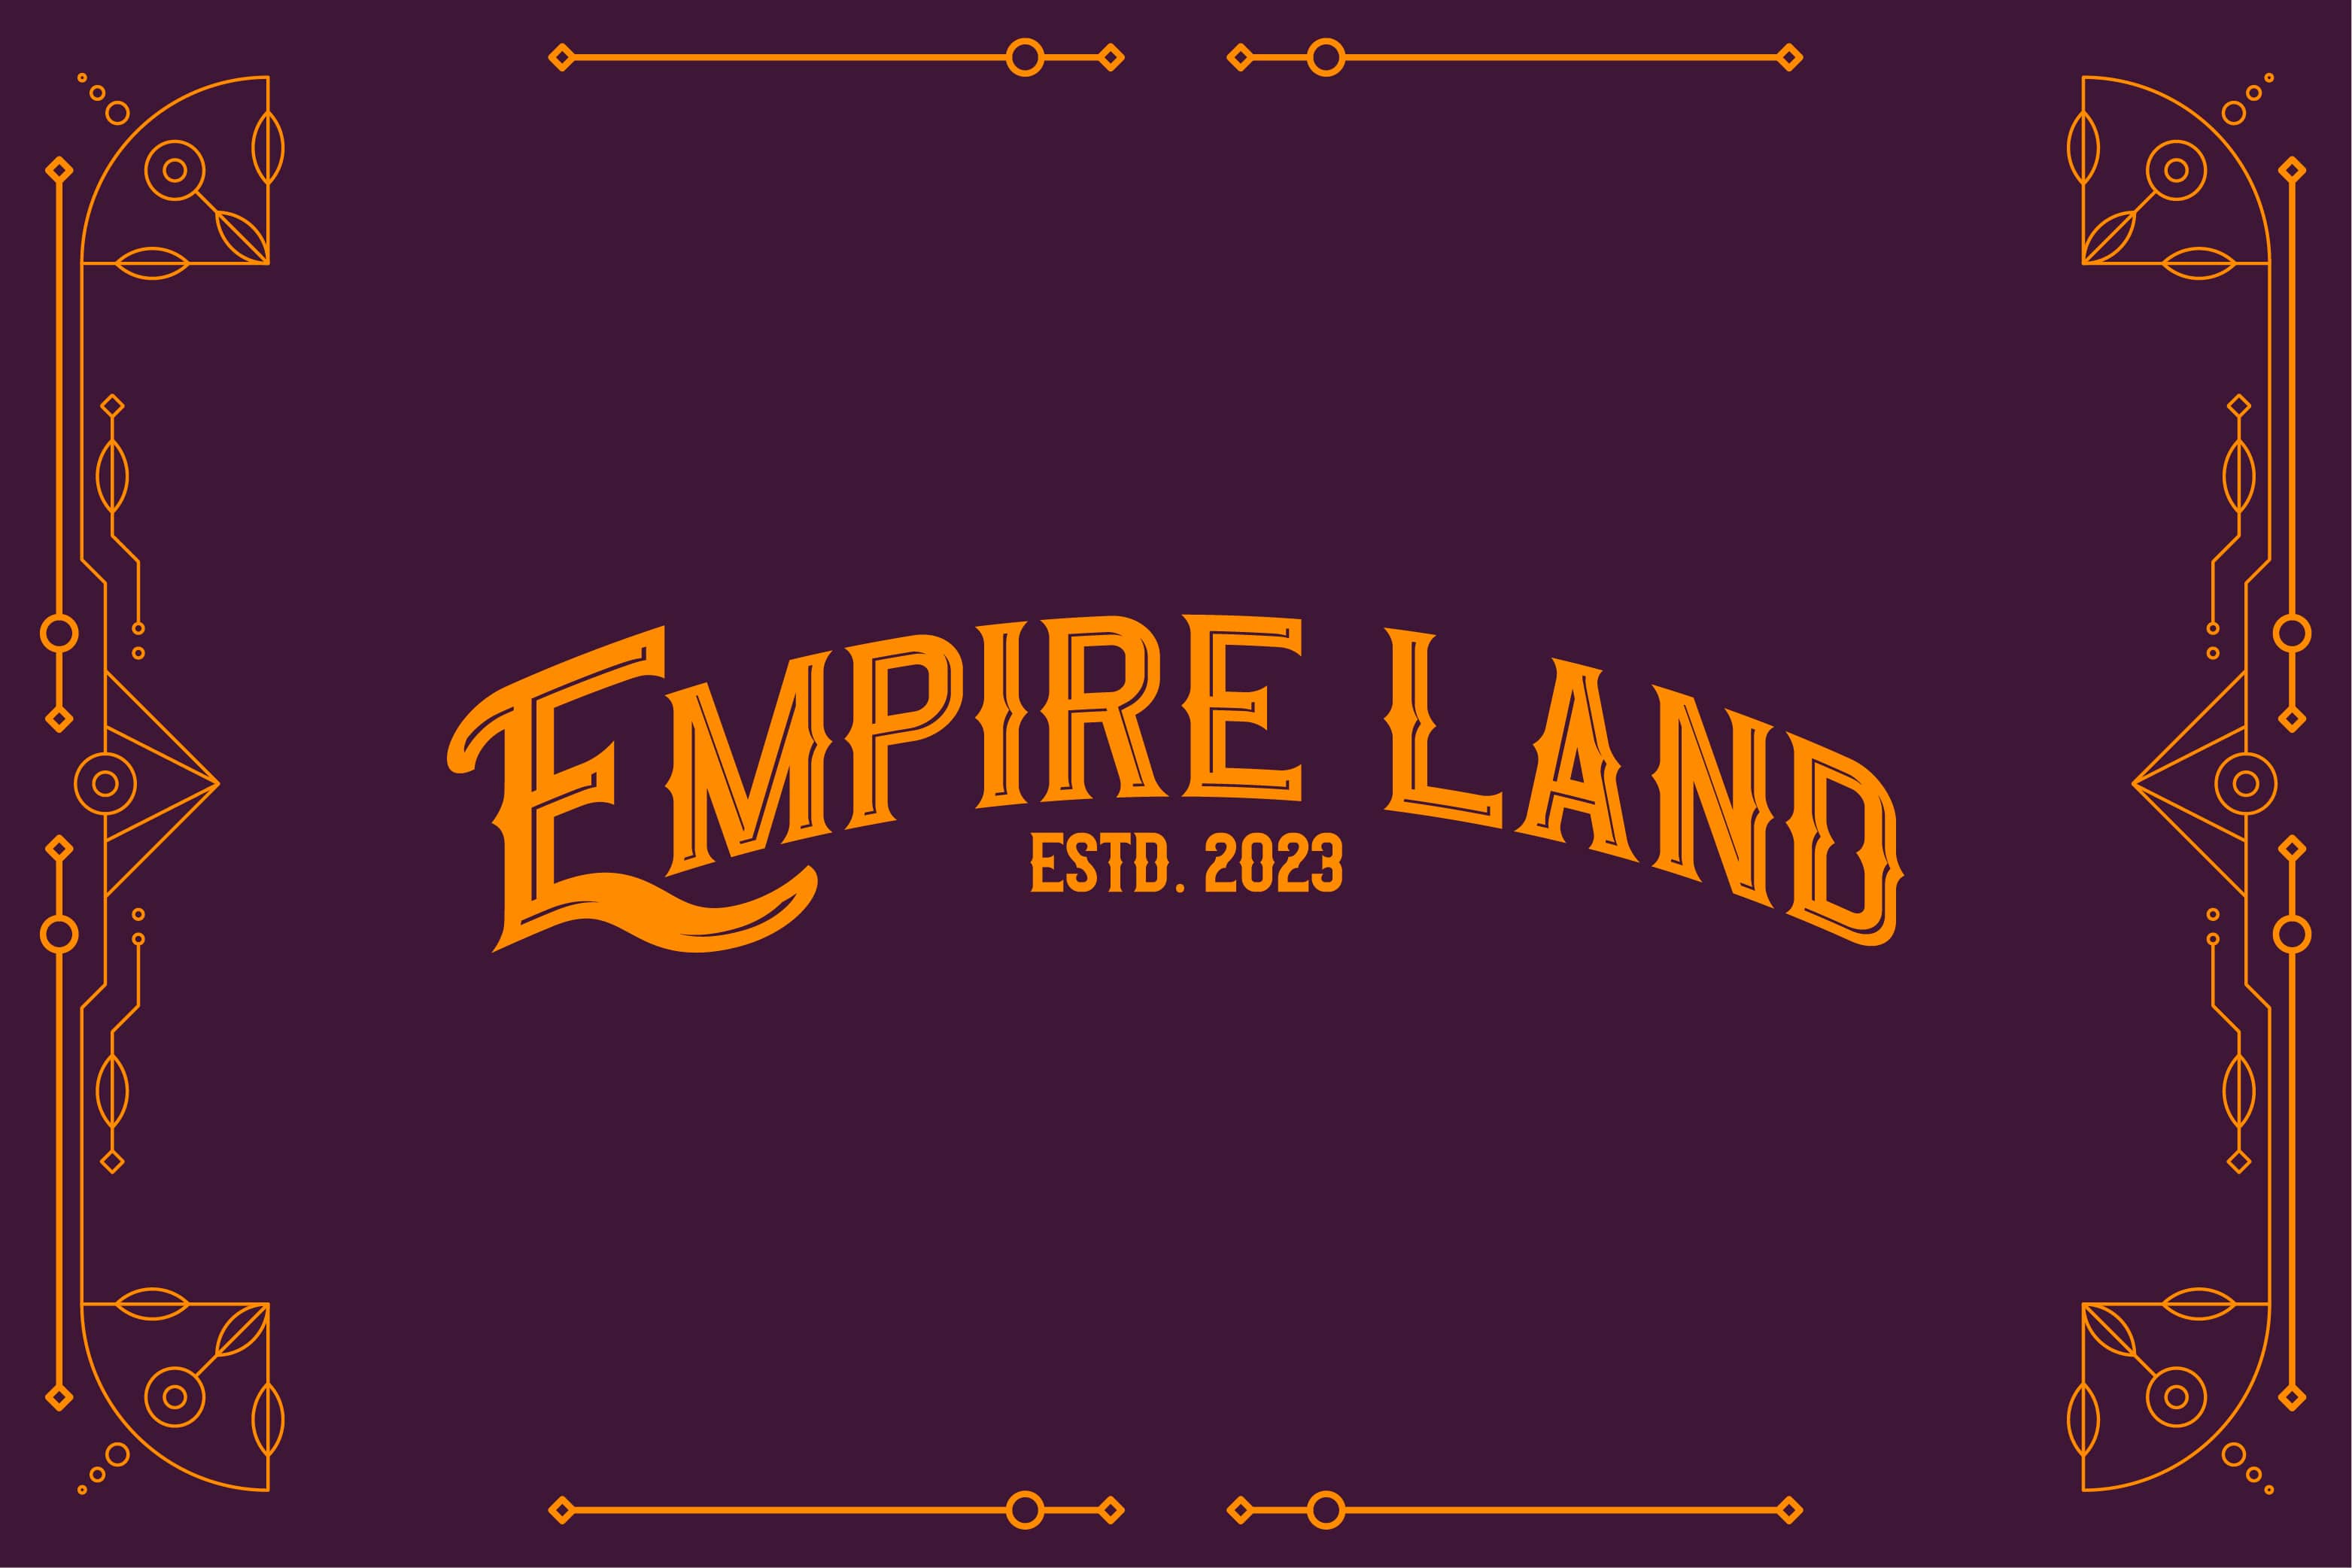 The empire land logo on a purple background.